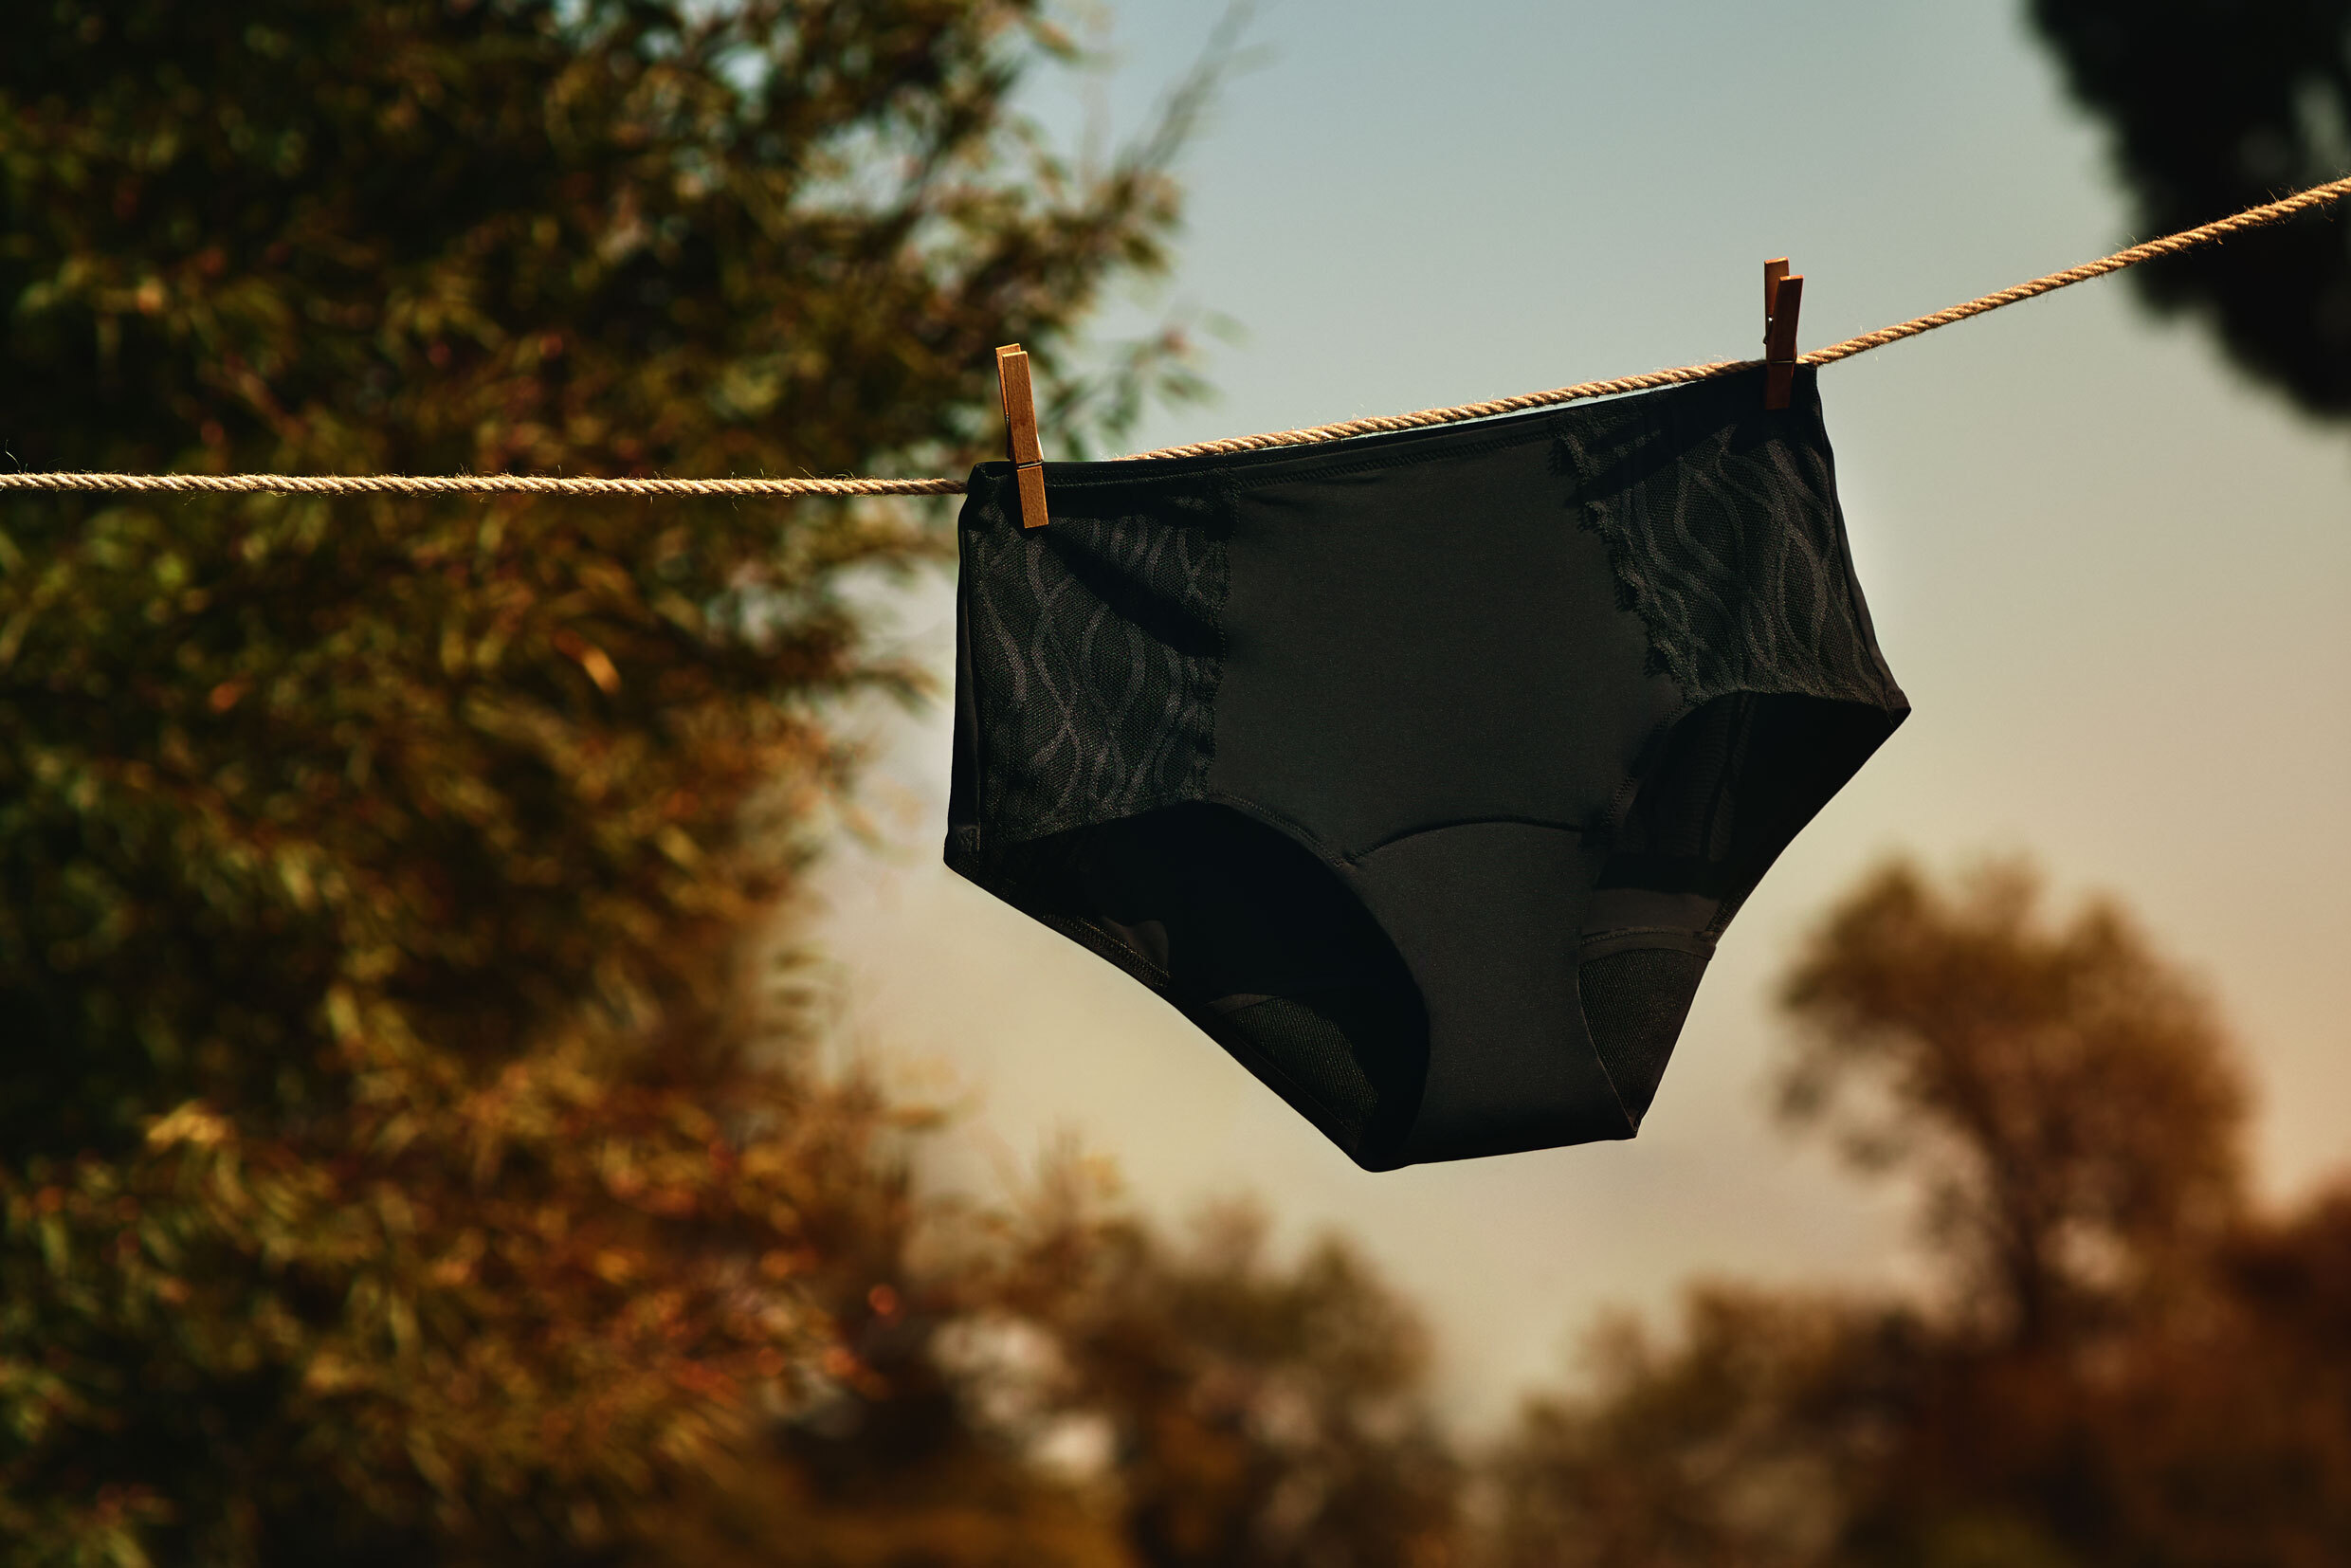 Learn more about TENA Silhouette Washable Absorbent Underwear